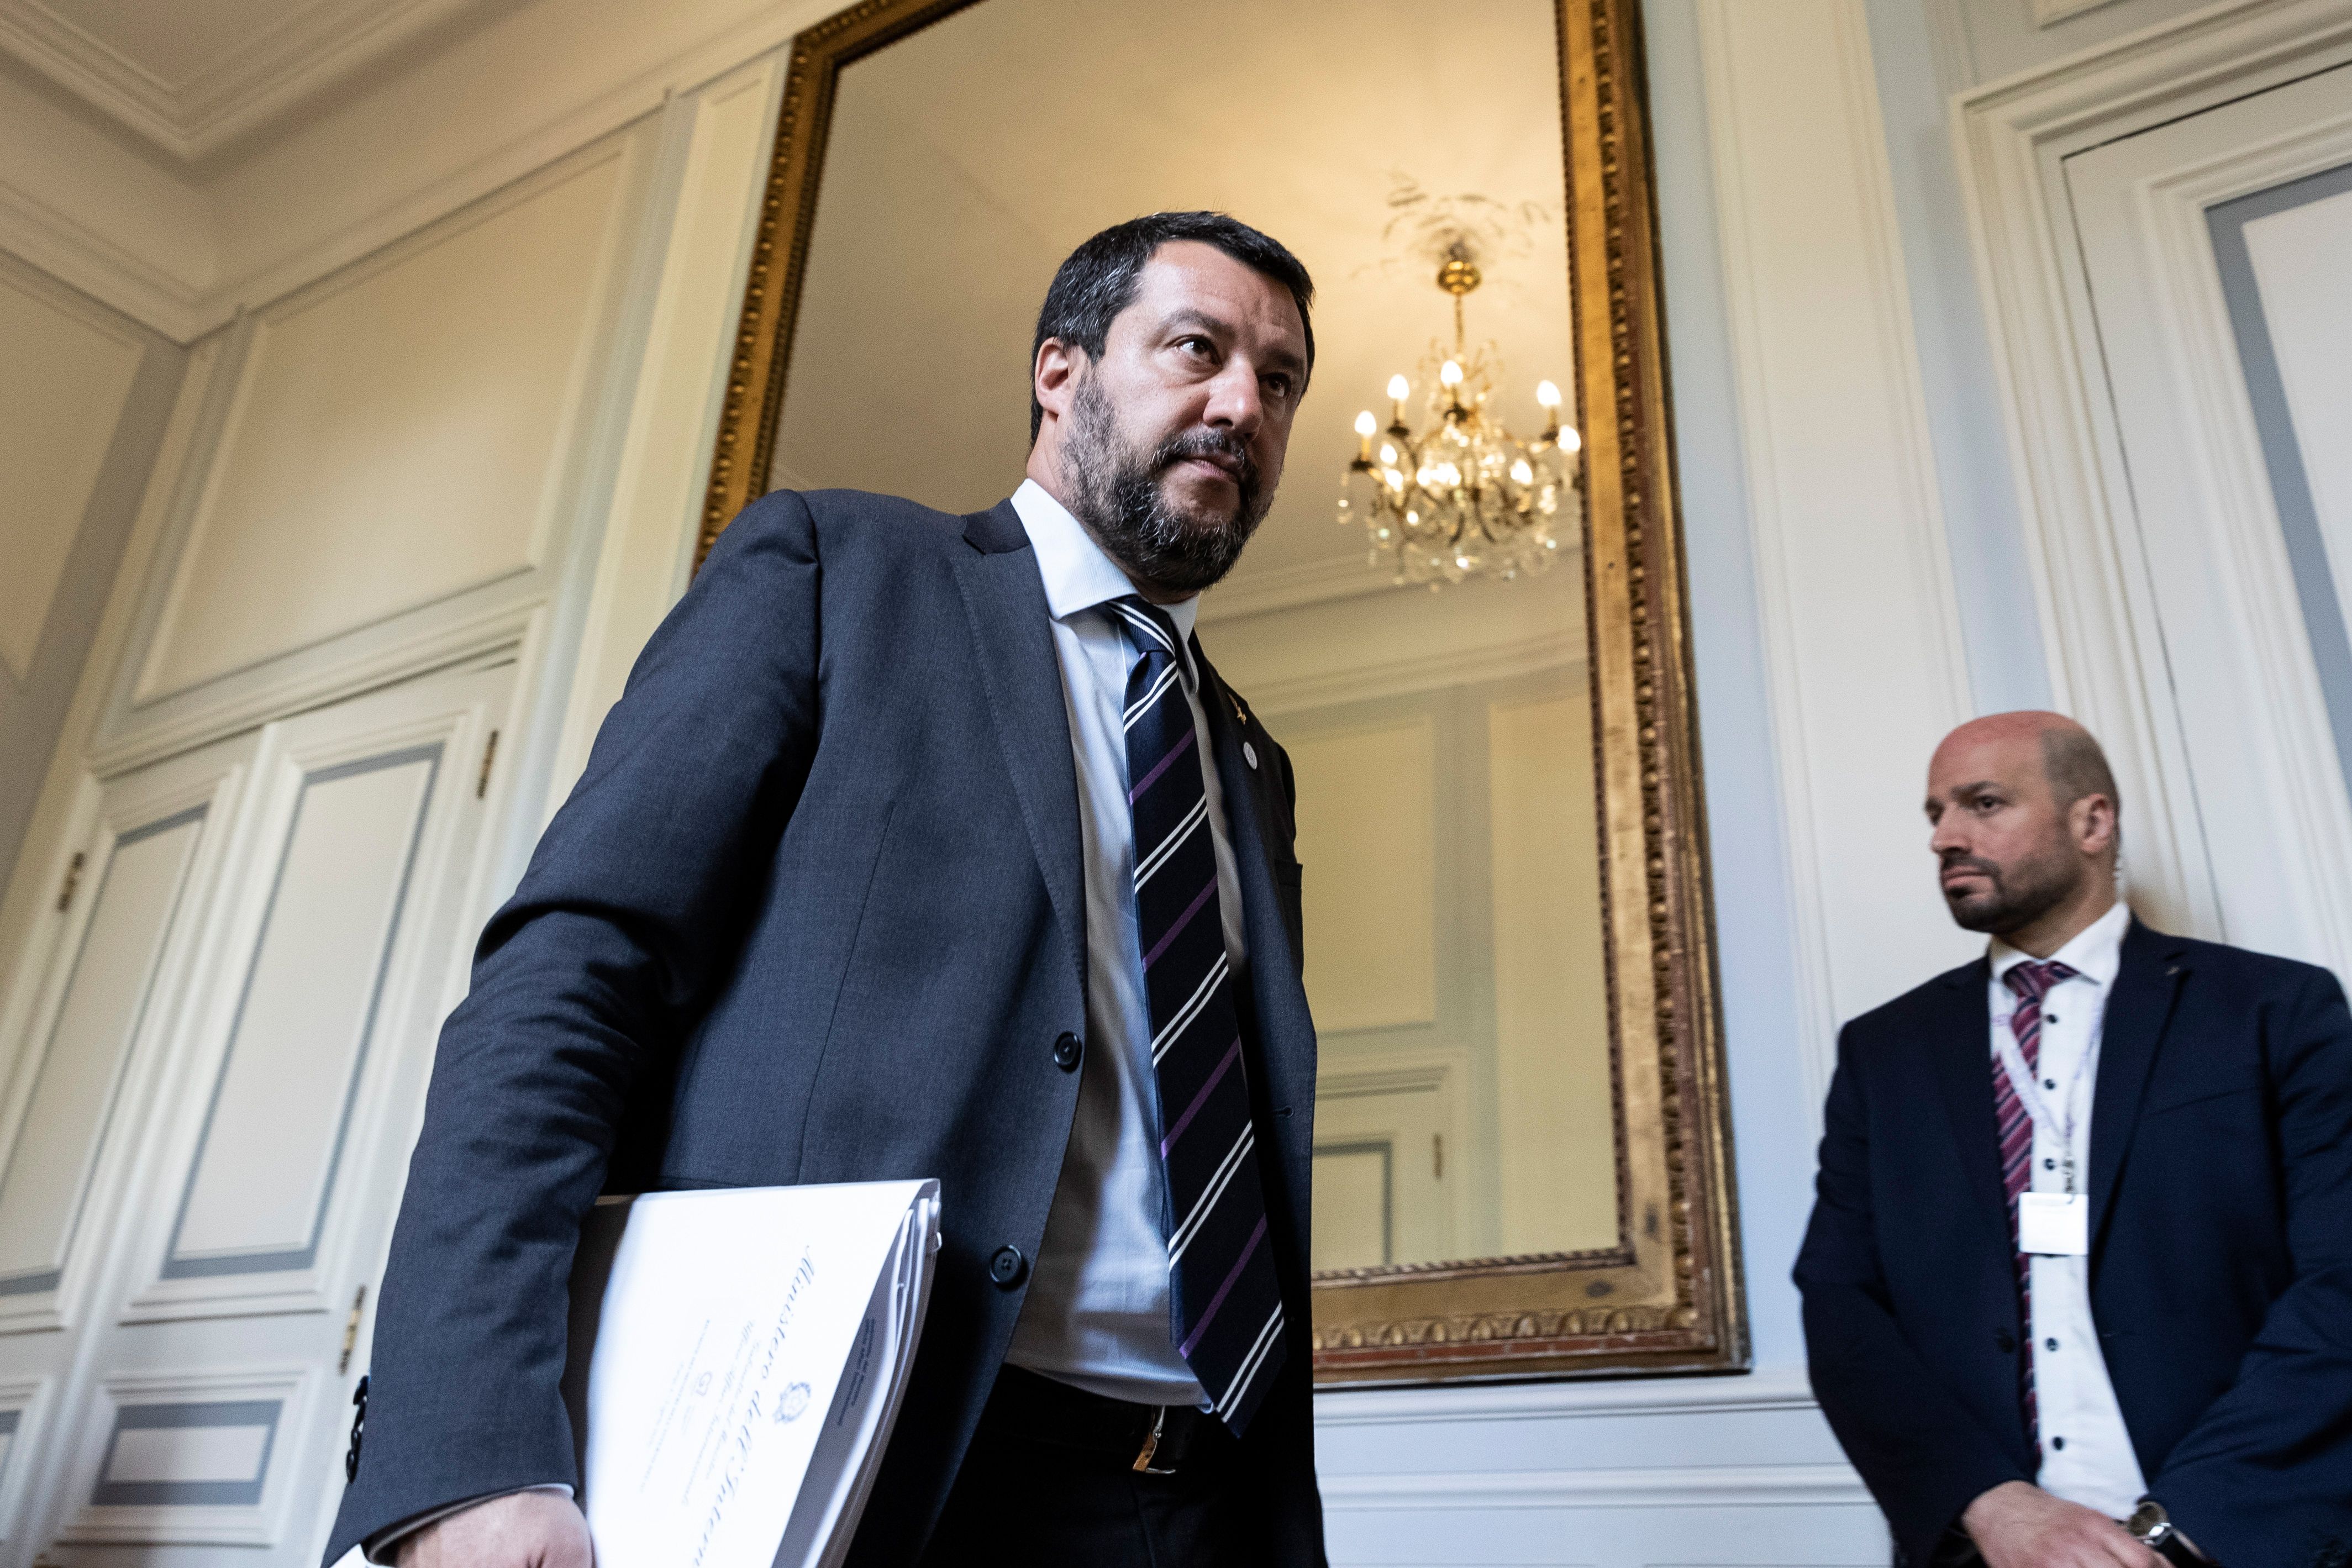 Italys Interior Minister and deputy Prime Minister Matteo Salvini (R) walks towards a meeting at the Ministry of Interior, Place Beauvau, in Paris on April 4, 2019 to prepare the G7 Summit in Biarritz which will take place from August 25 to 27, 2019. (KENZO TRIBOUILLARD/AFP/Getty Images)